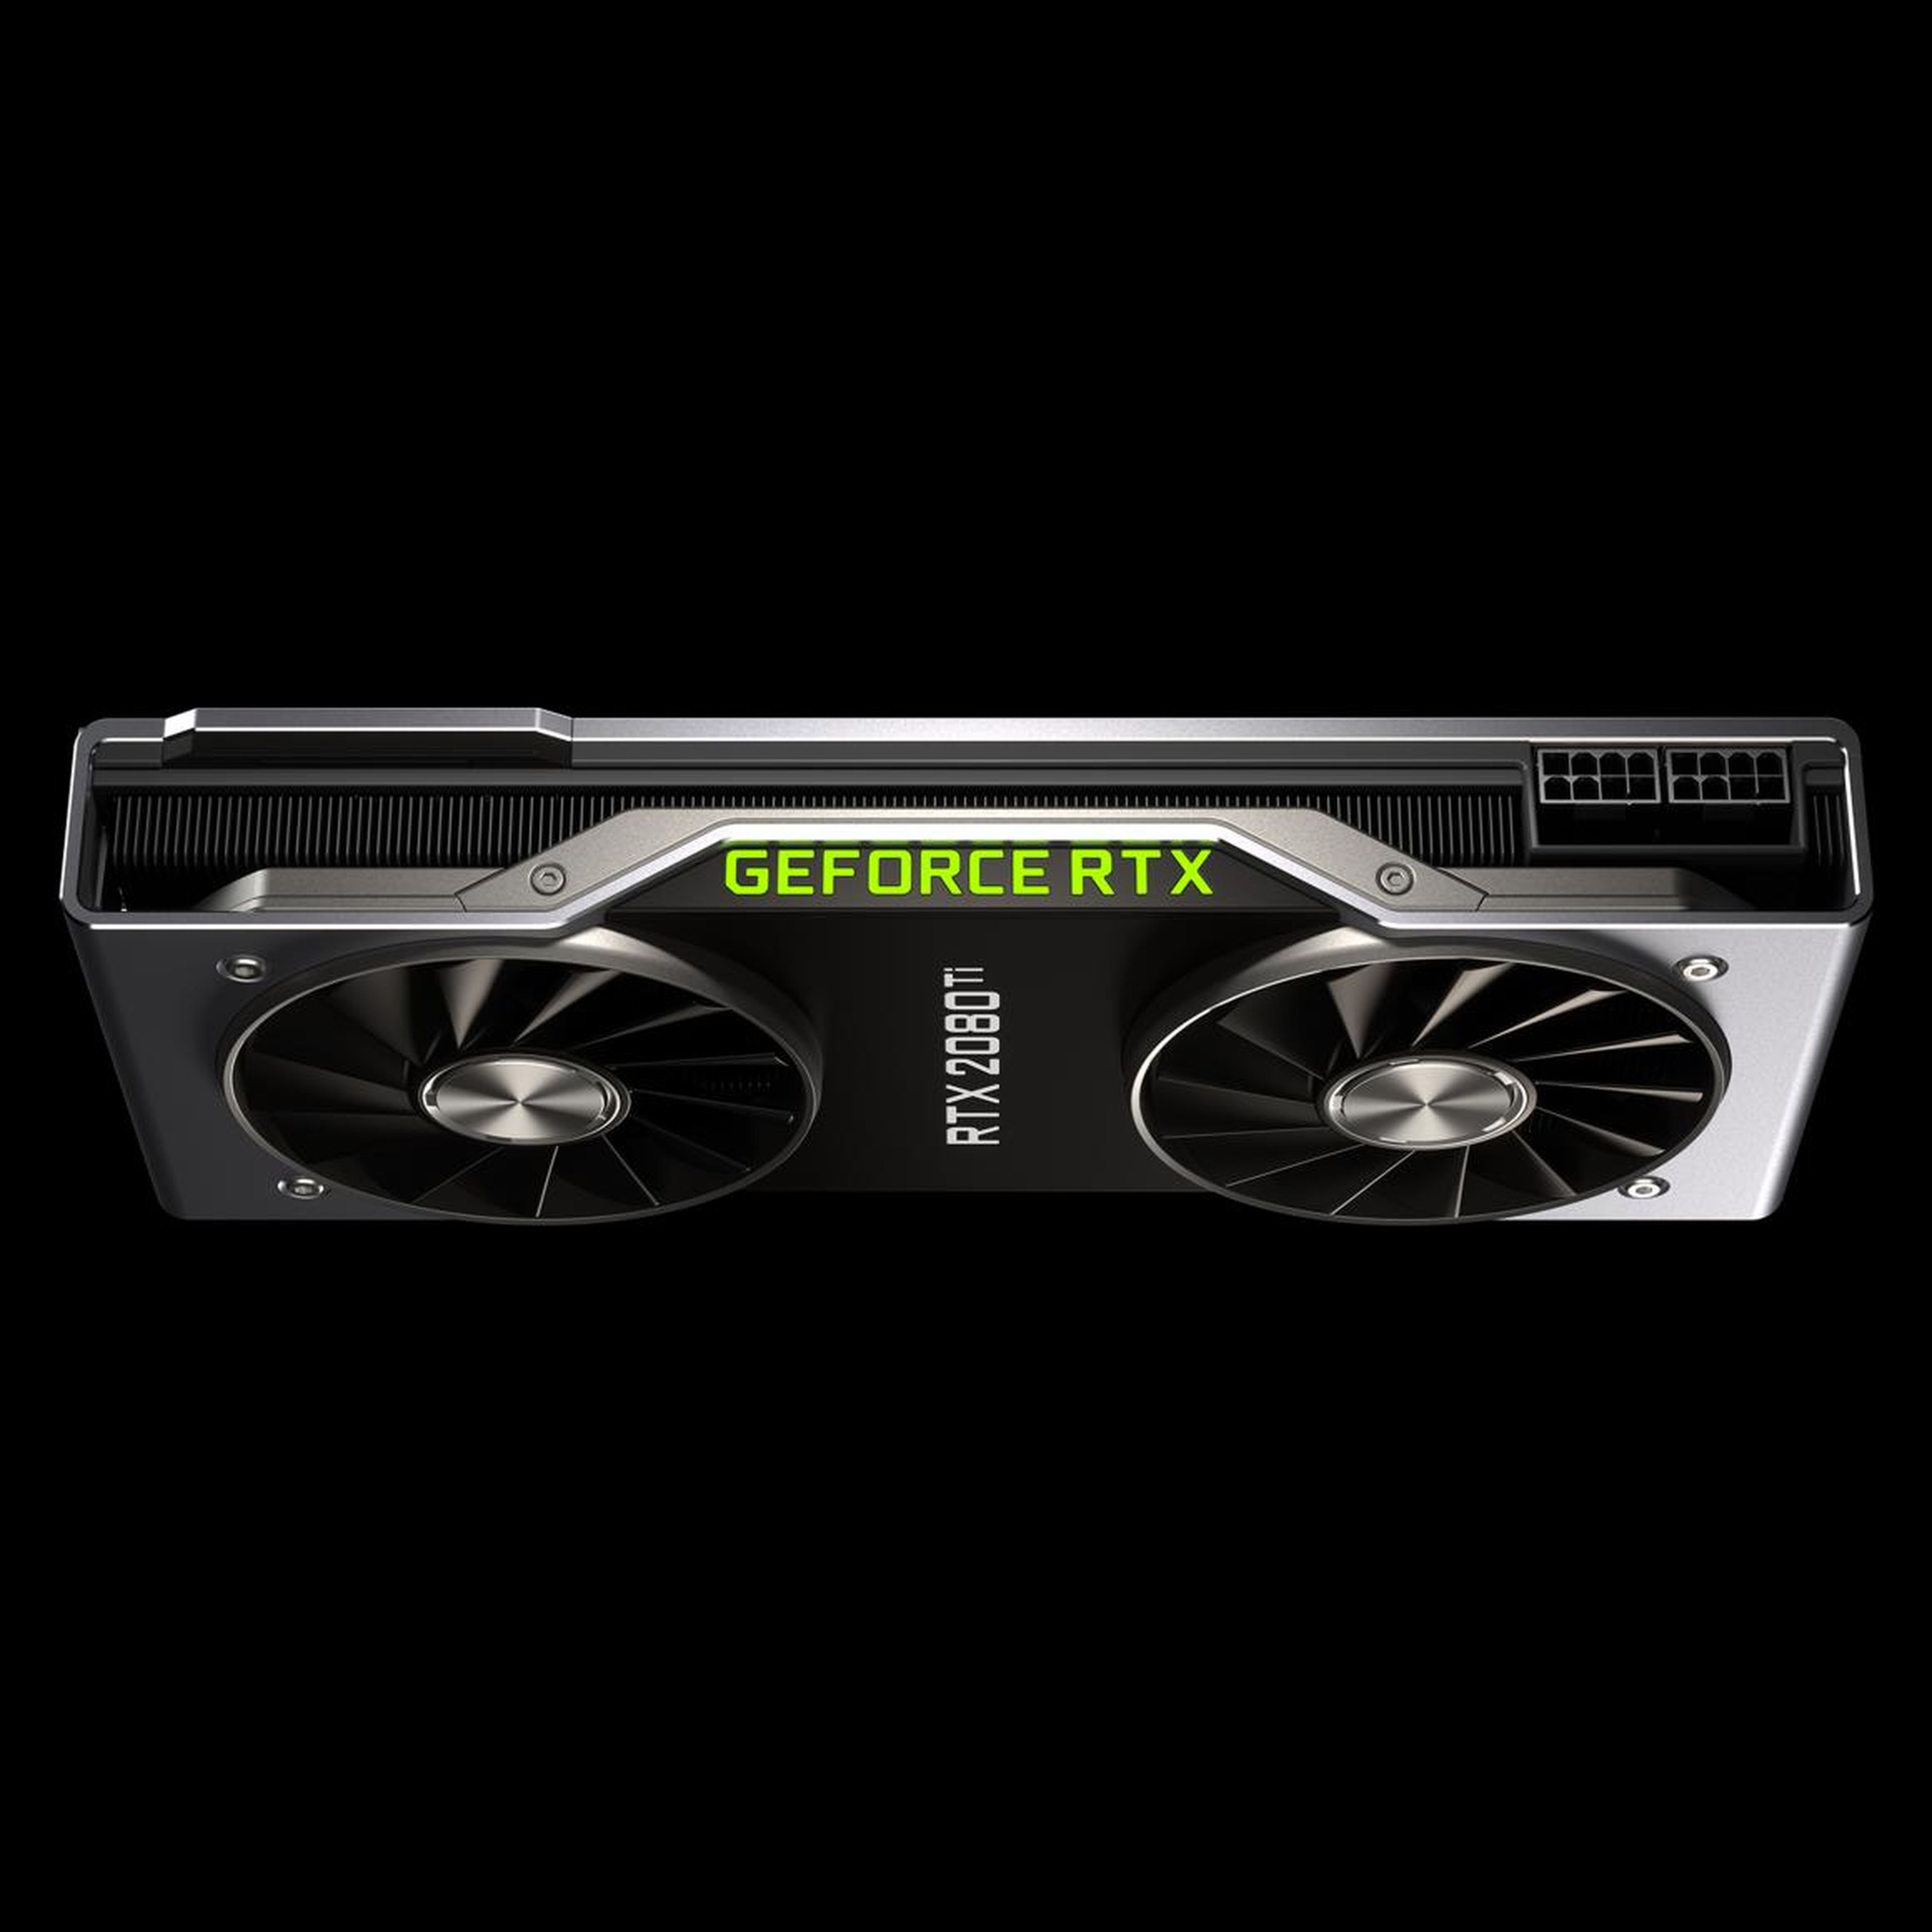 The RTX 2080 Ti is the flagship card of the new lineup, and has the beefiest specs — and price.